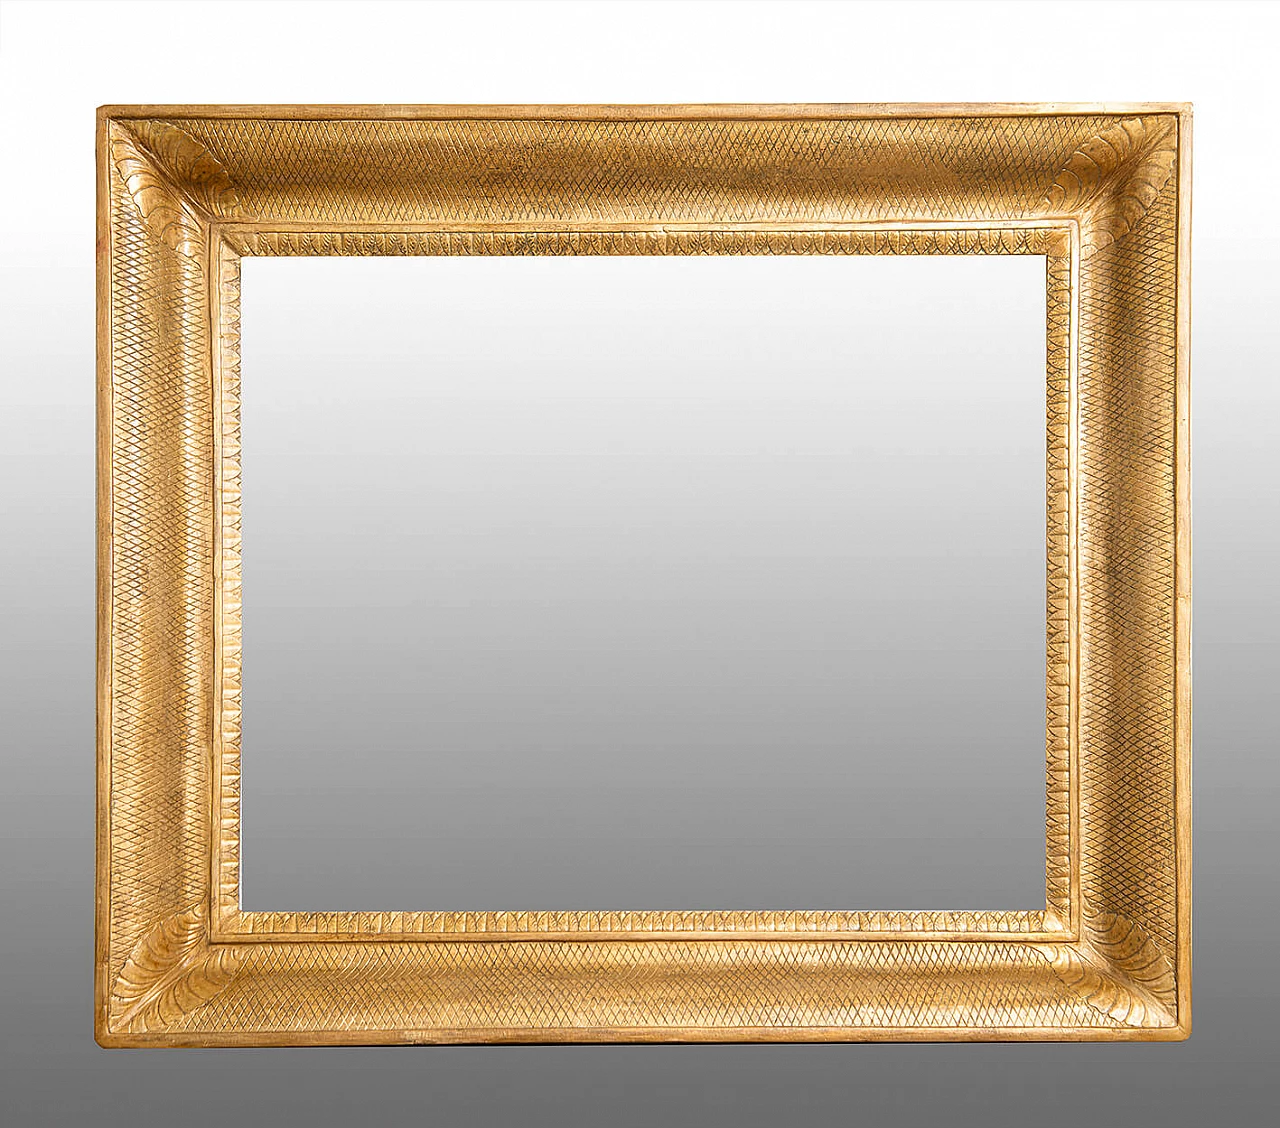 Neapolitan Empire gilt and carved wood frame, early 19th century 1